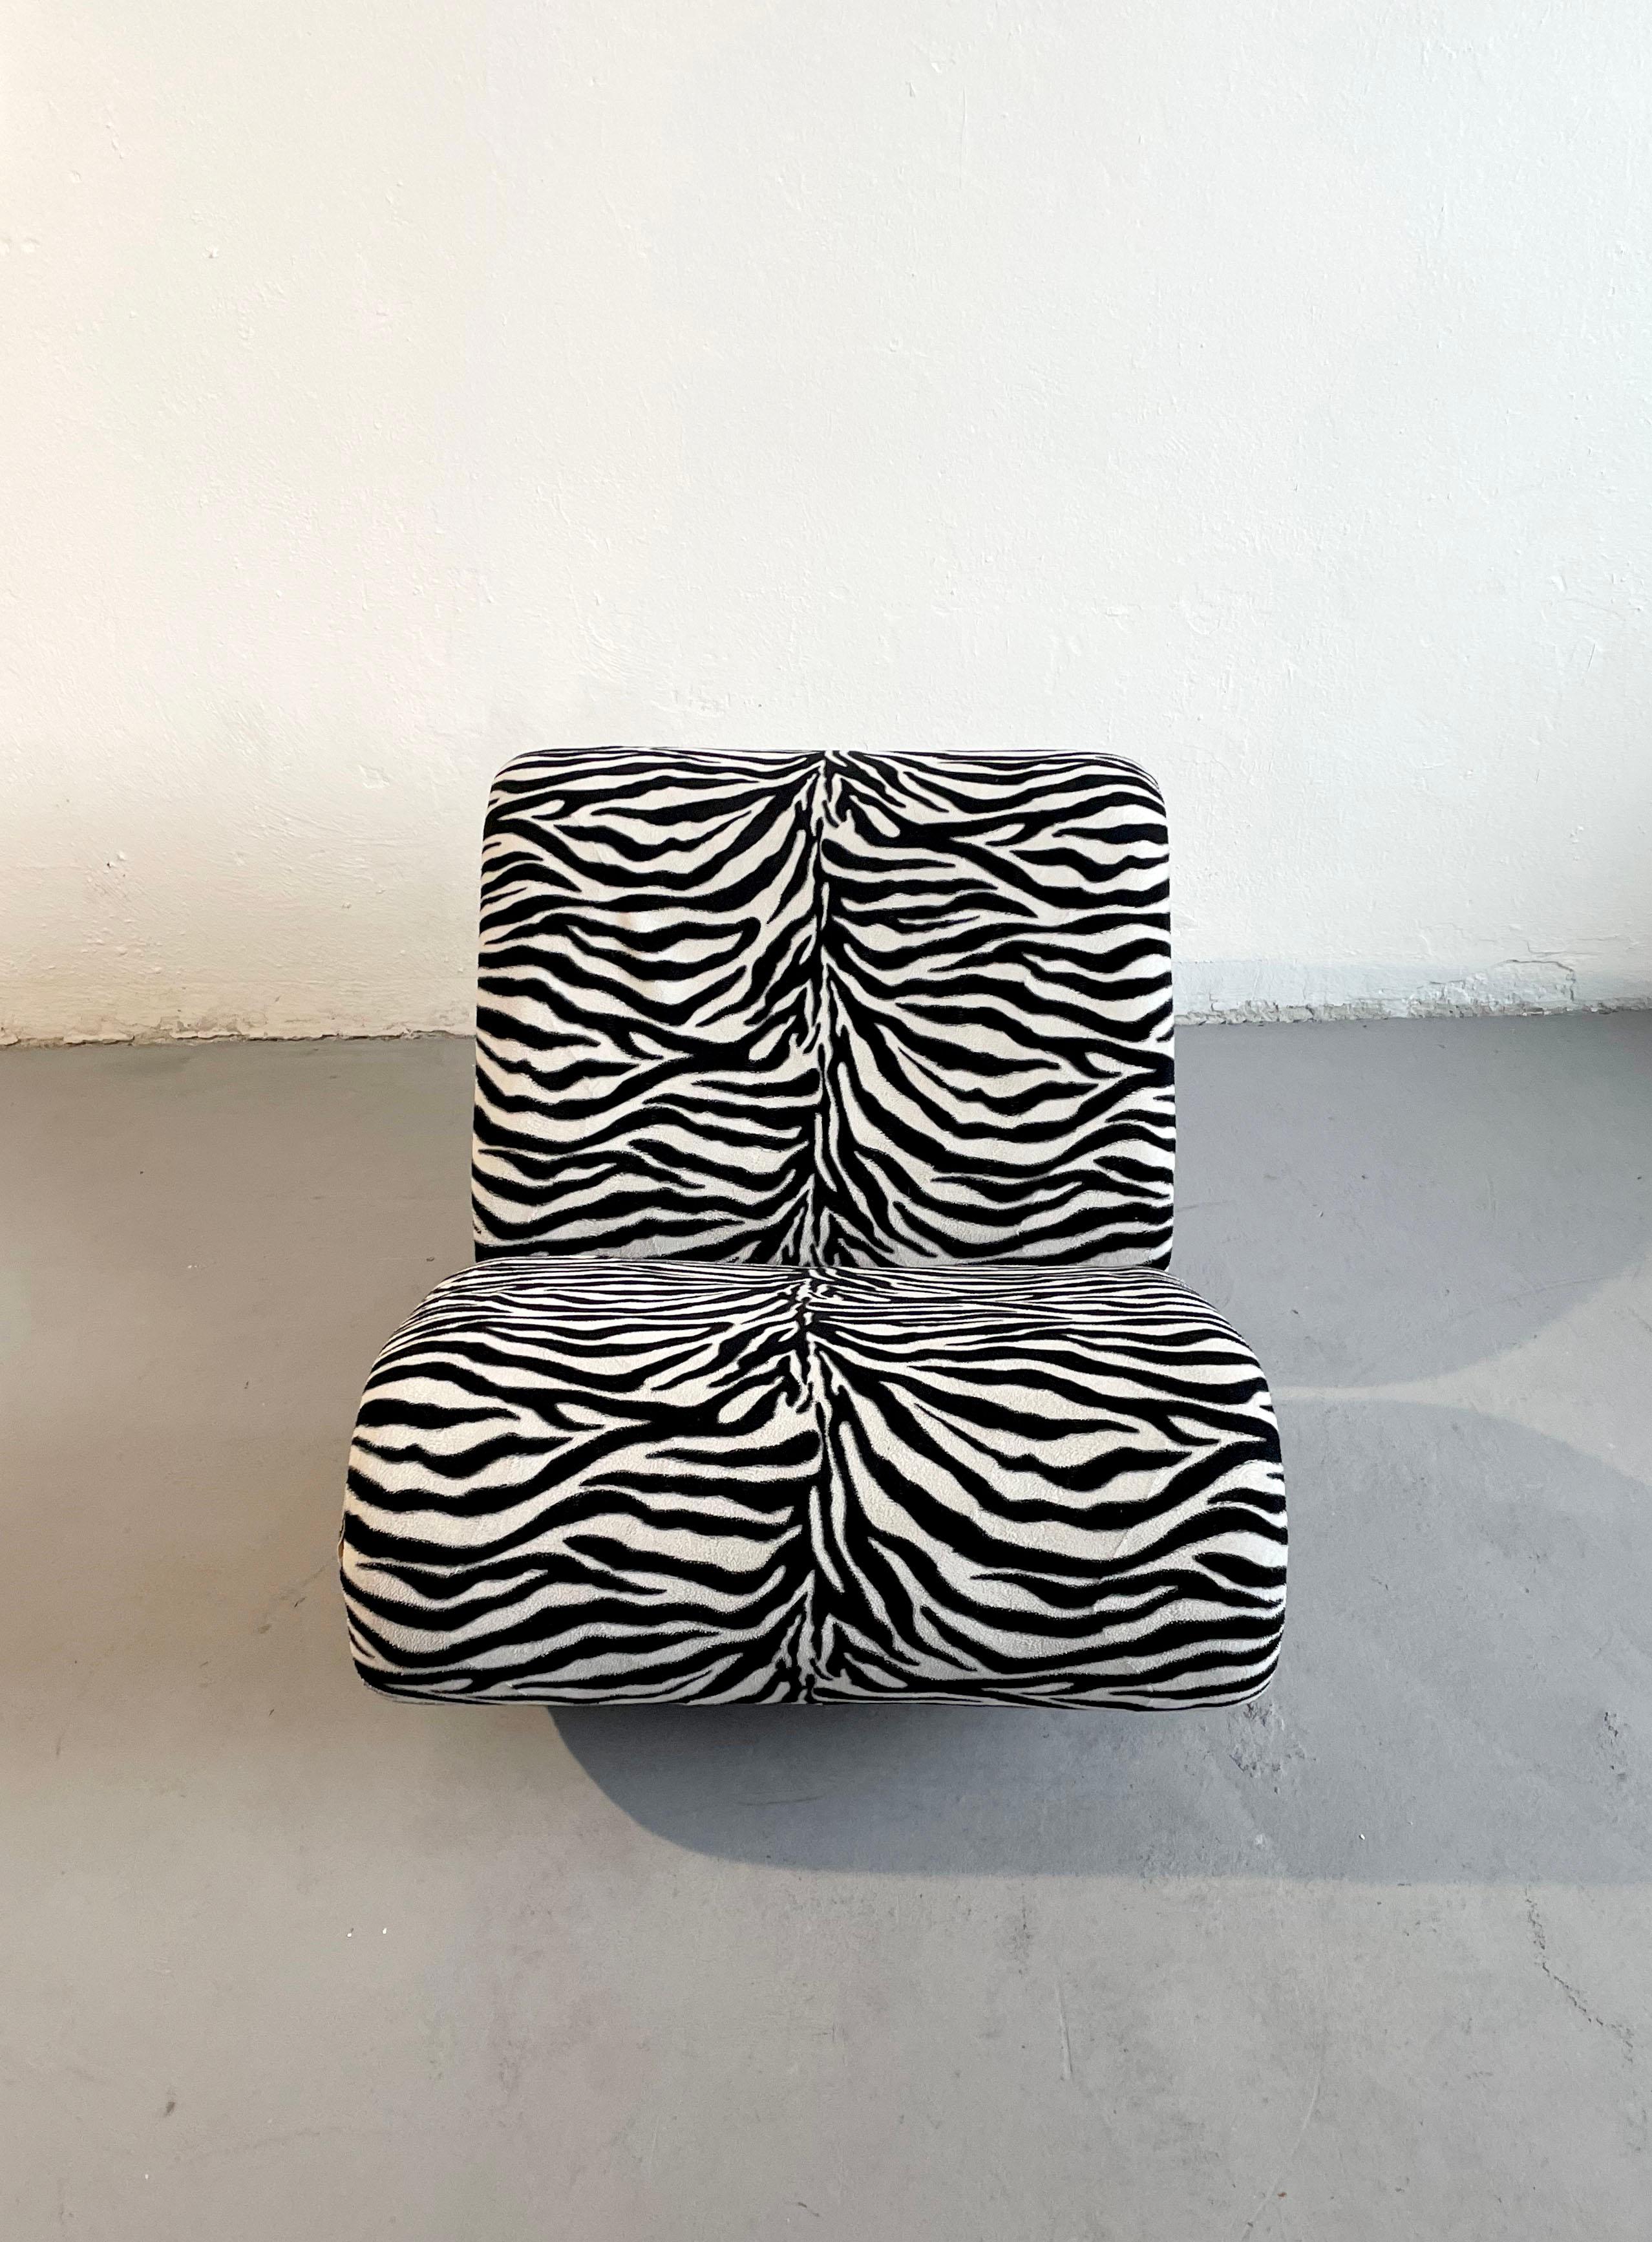 Vintage Sculptural Organic Shape Lounge Chair in Zebra Fabric, C1970s For Sale 3